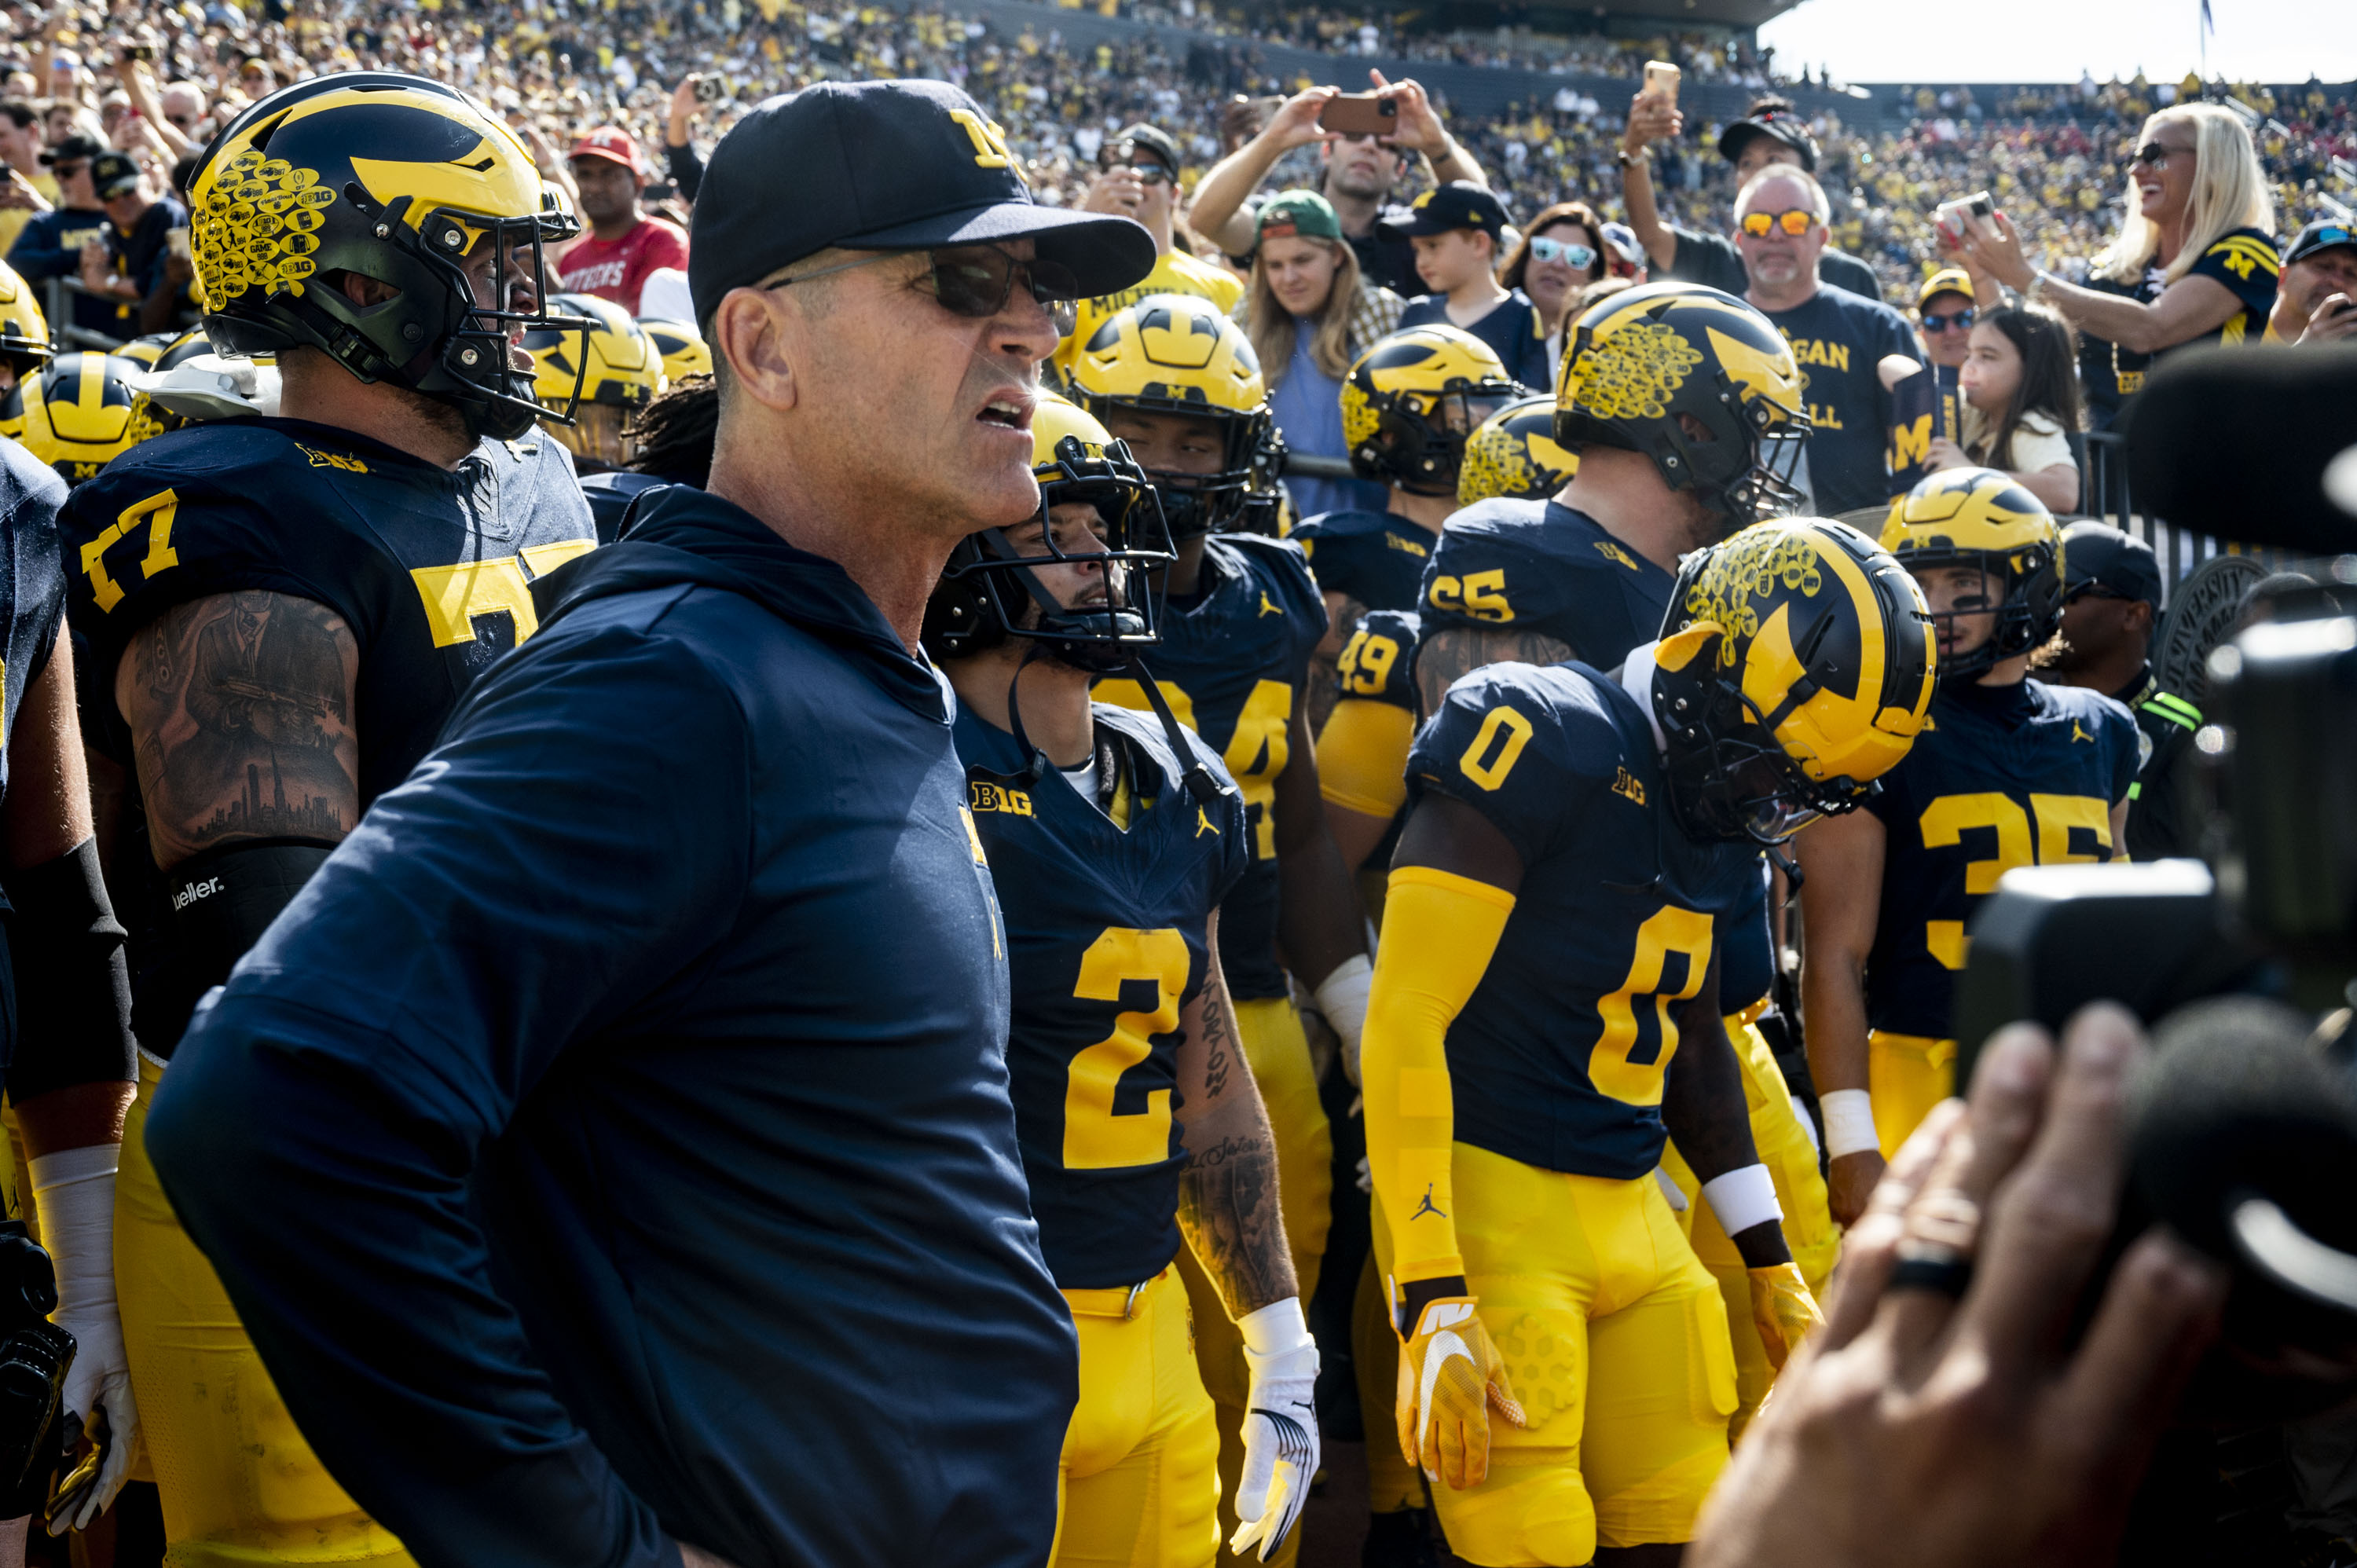 Michigan players marvel at Jim Harbaugh's defiance, change over last year - mlive.com